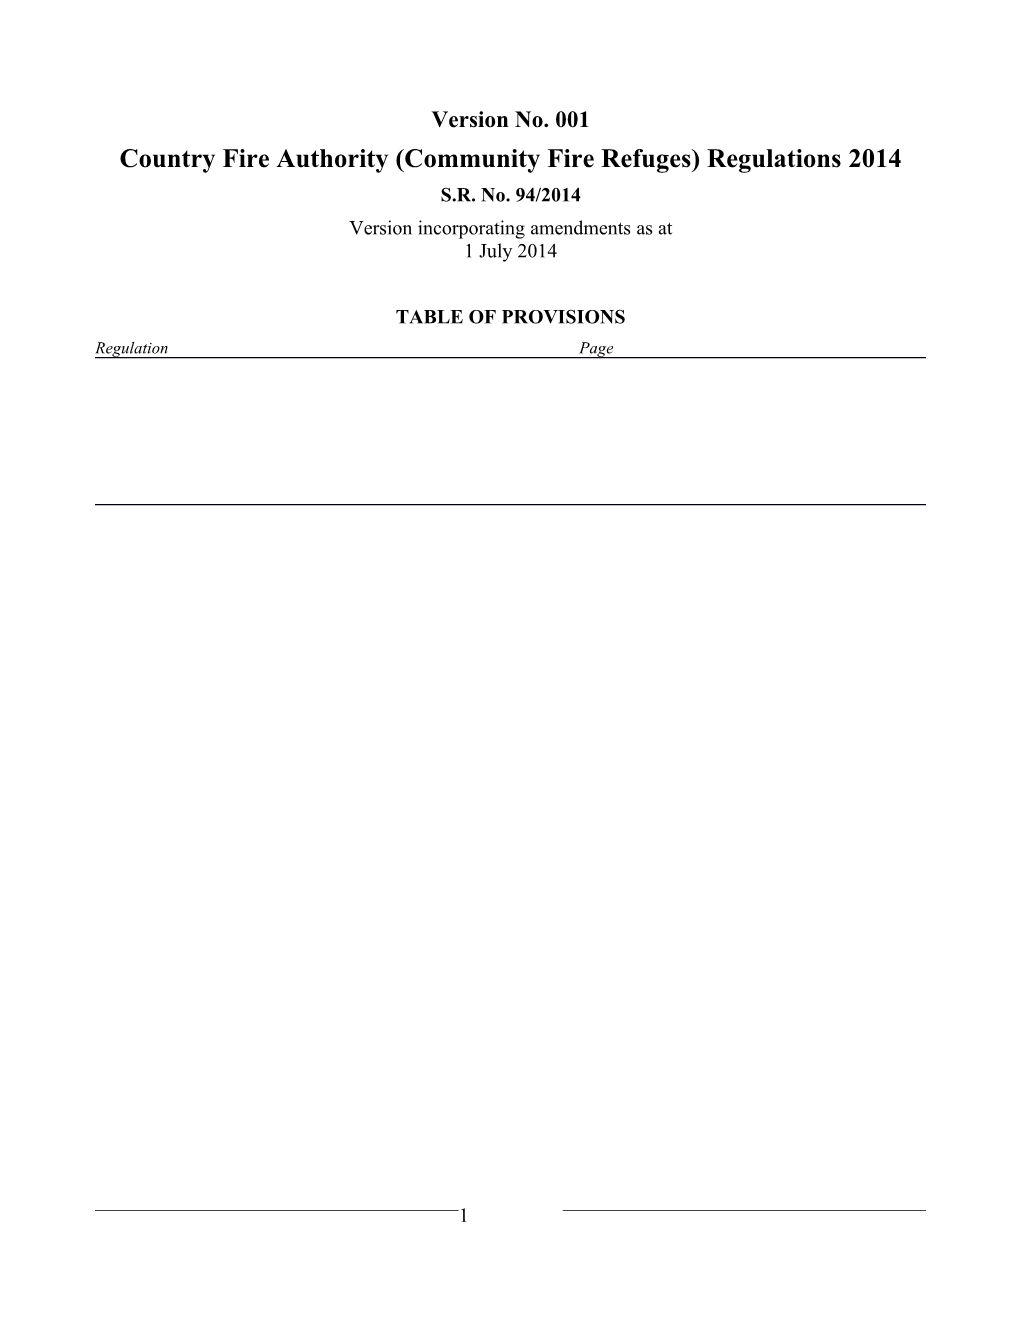 Country Fire Authority (Community Fire Refuges) Regulations 2014